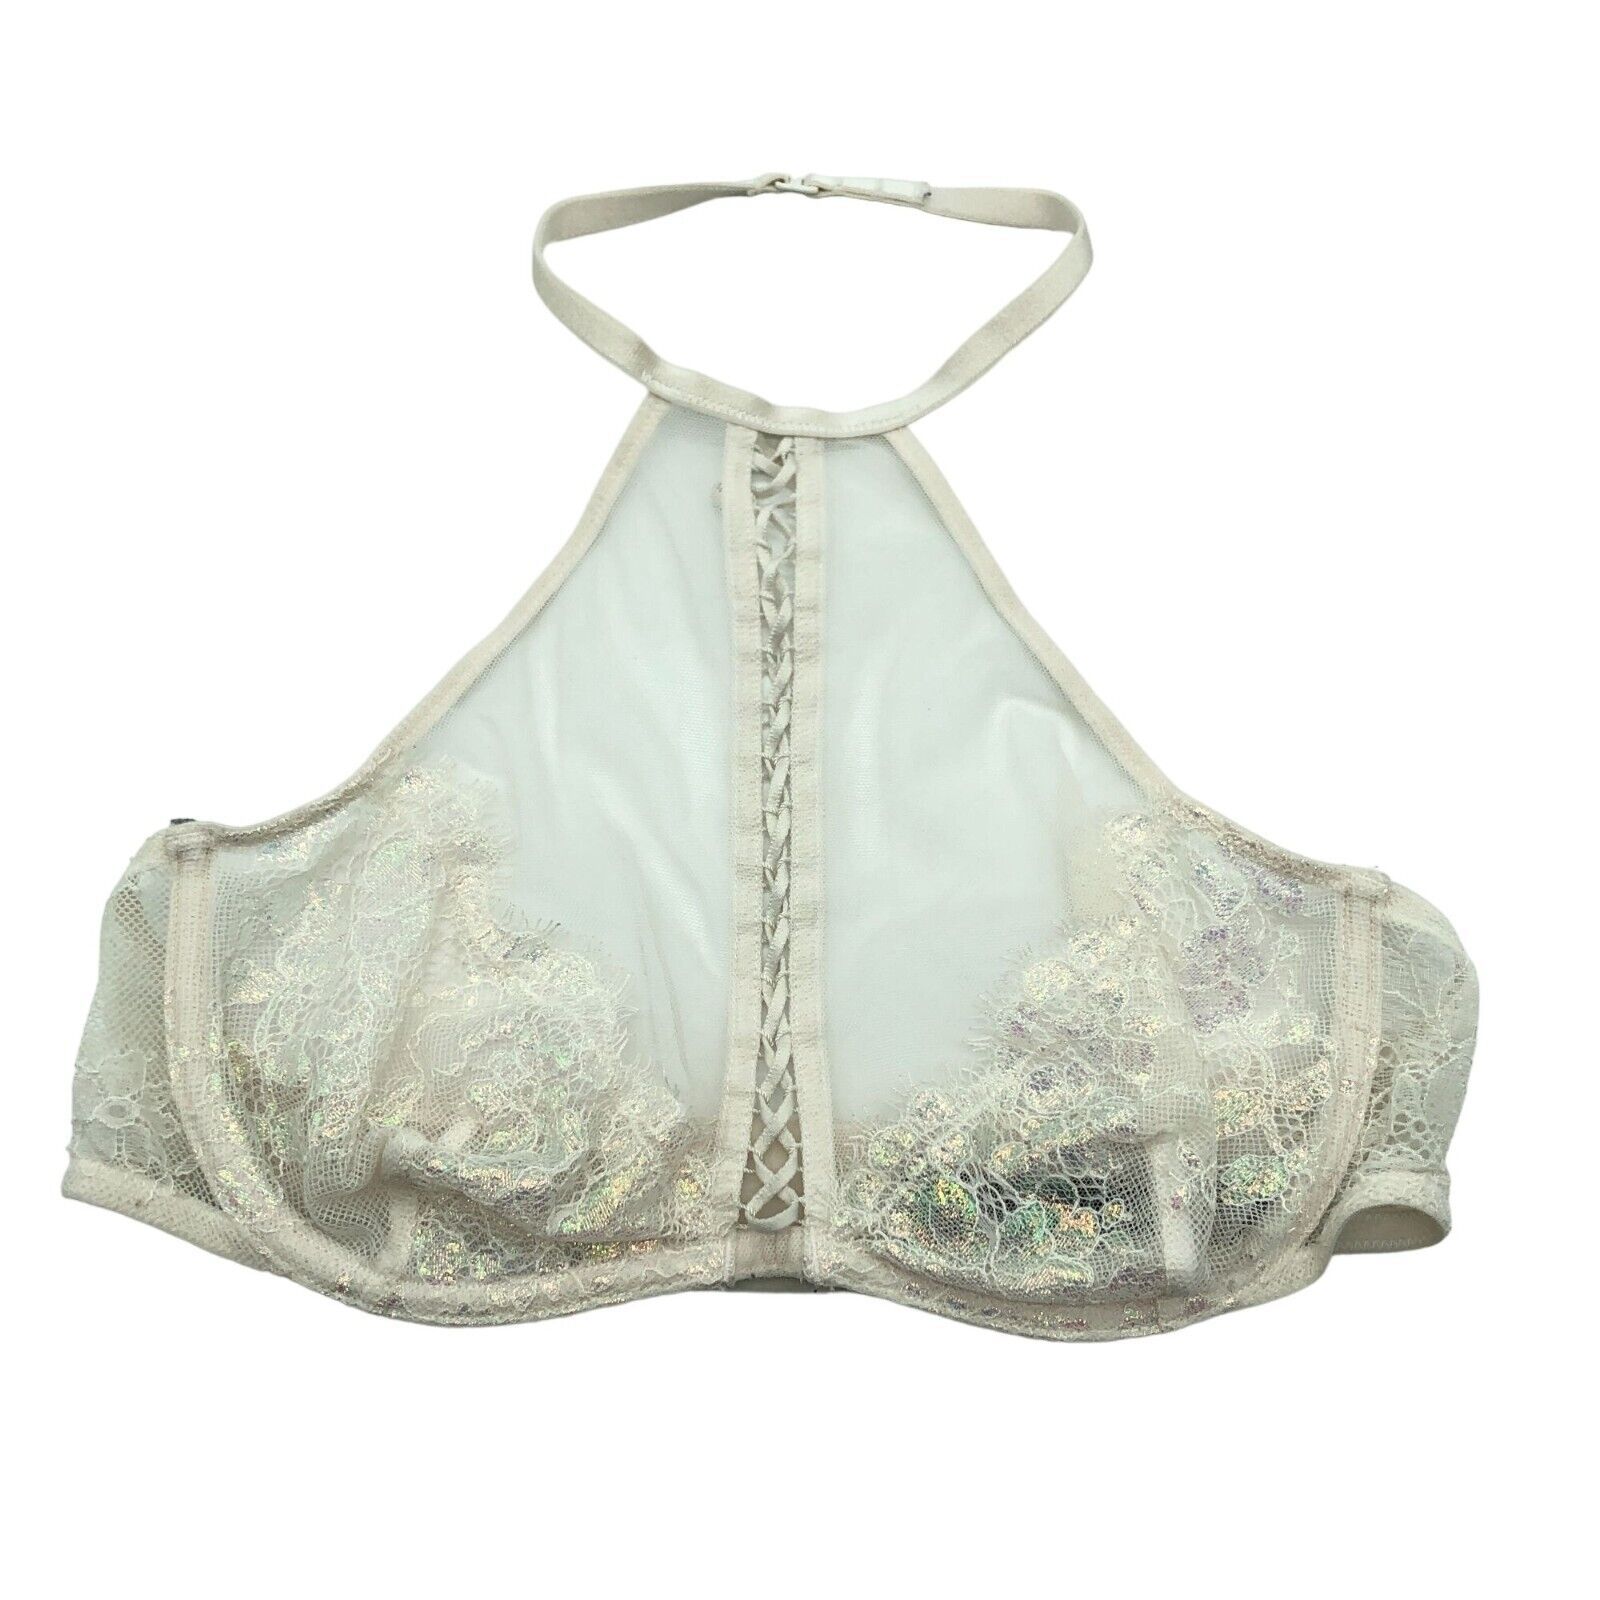 Primary image for Victorias Secret Very Sexy Bralette Choker High Neck Iridescent White S